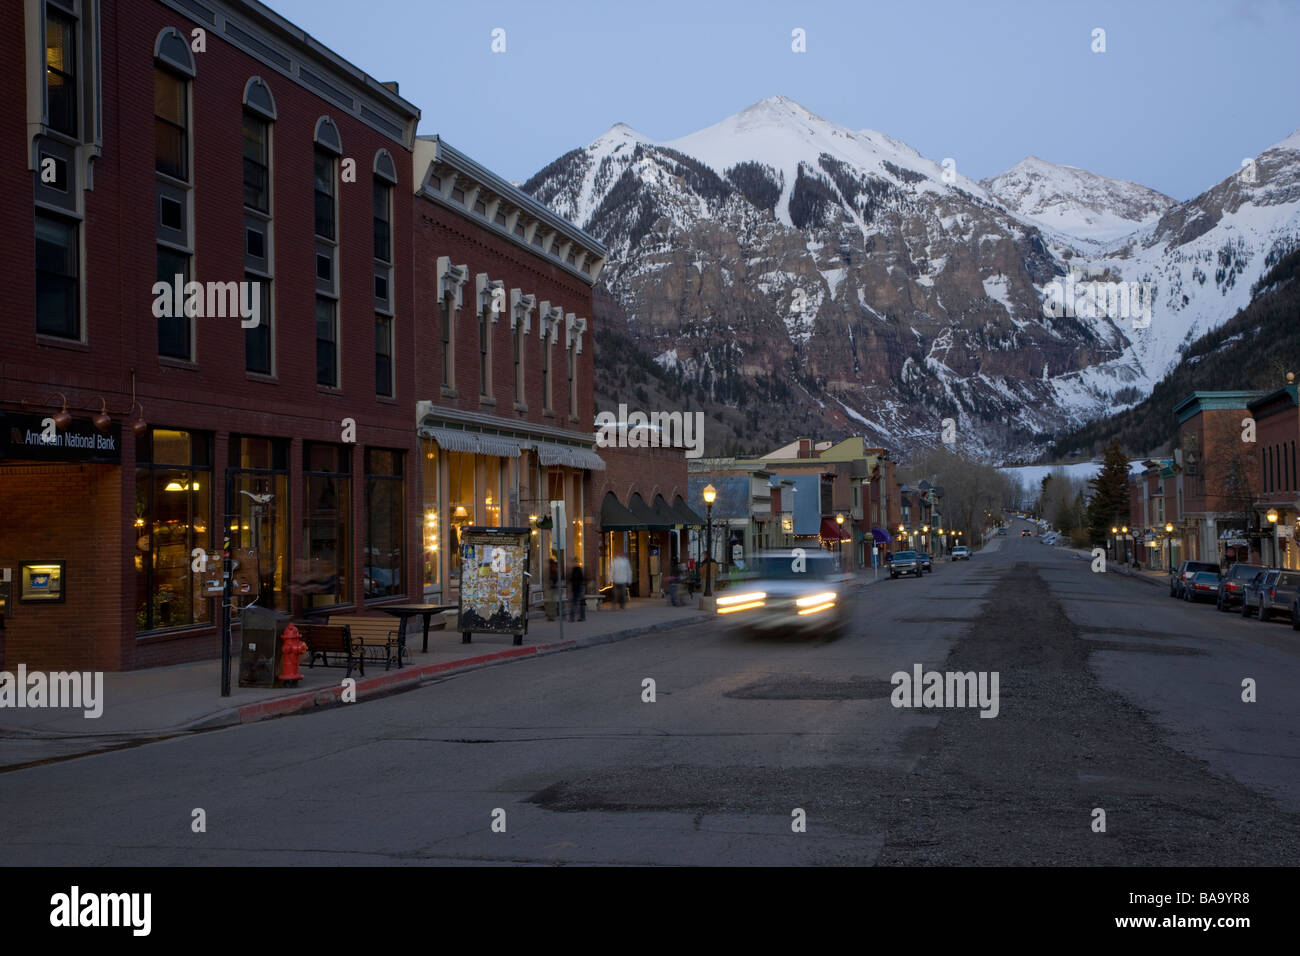 Late winter dusk view of the main street in historic town of Telluride Colorado USA home to a major ski resort Stock Photo